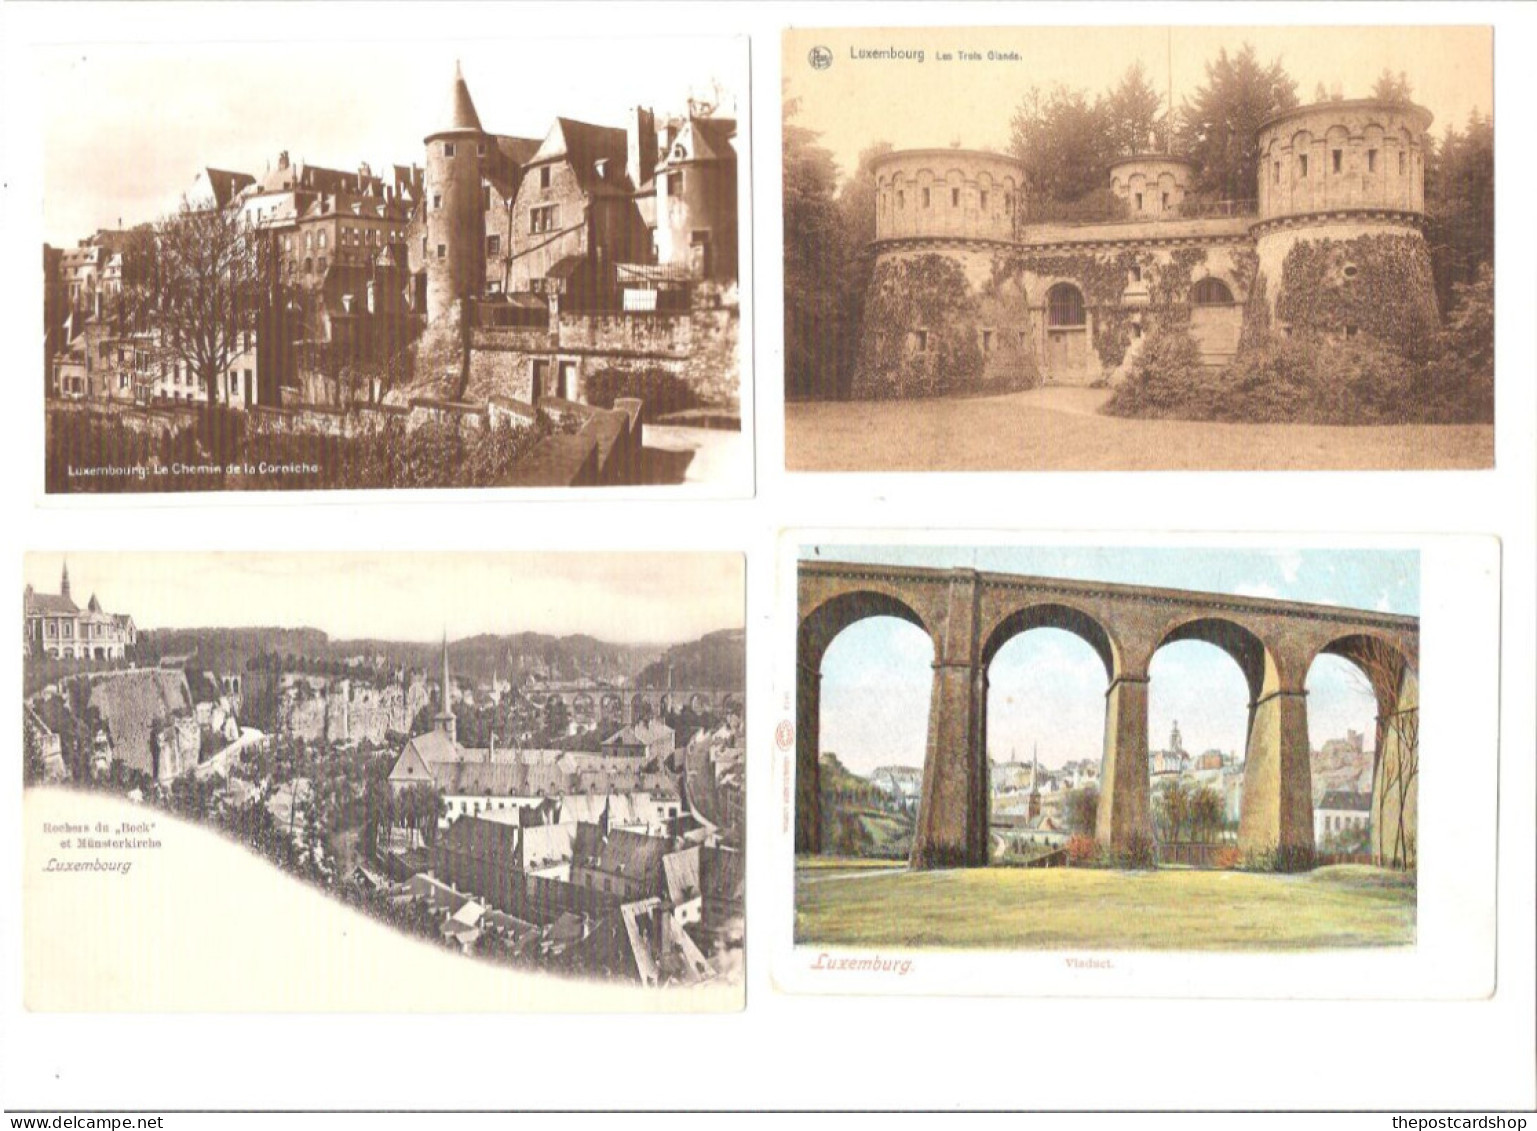 LUXEMBOURG 36 cards for sale post free insured delivery world wide BUY IT NOW FOR 60 EUROS POST FREE